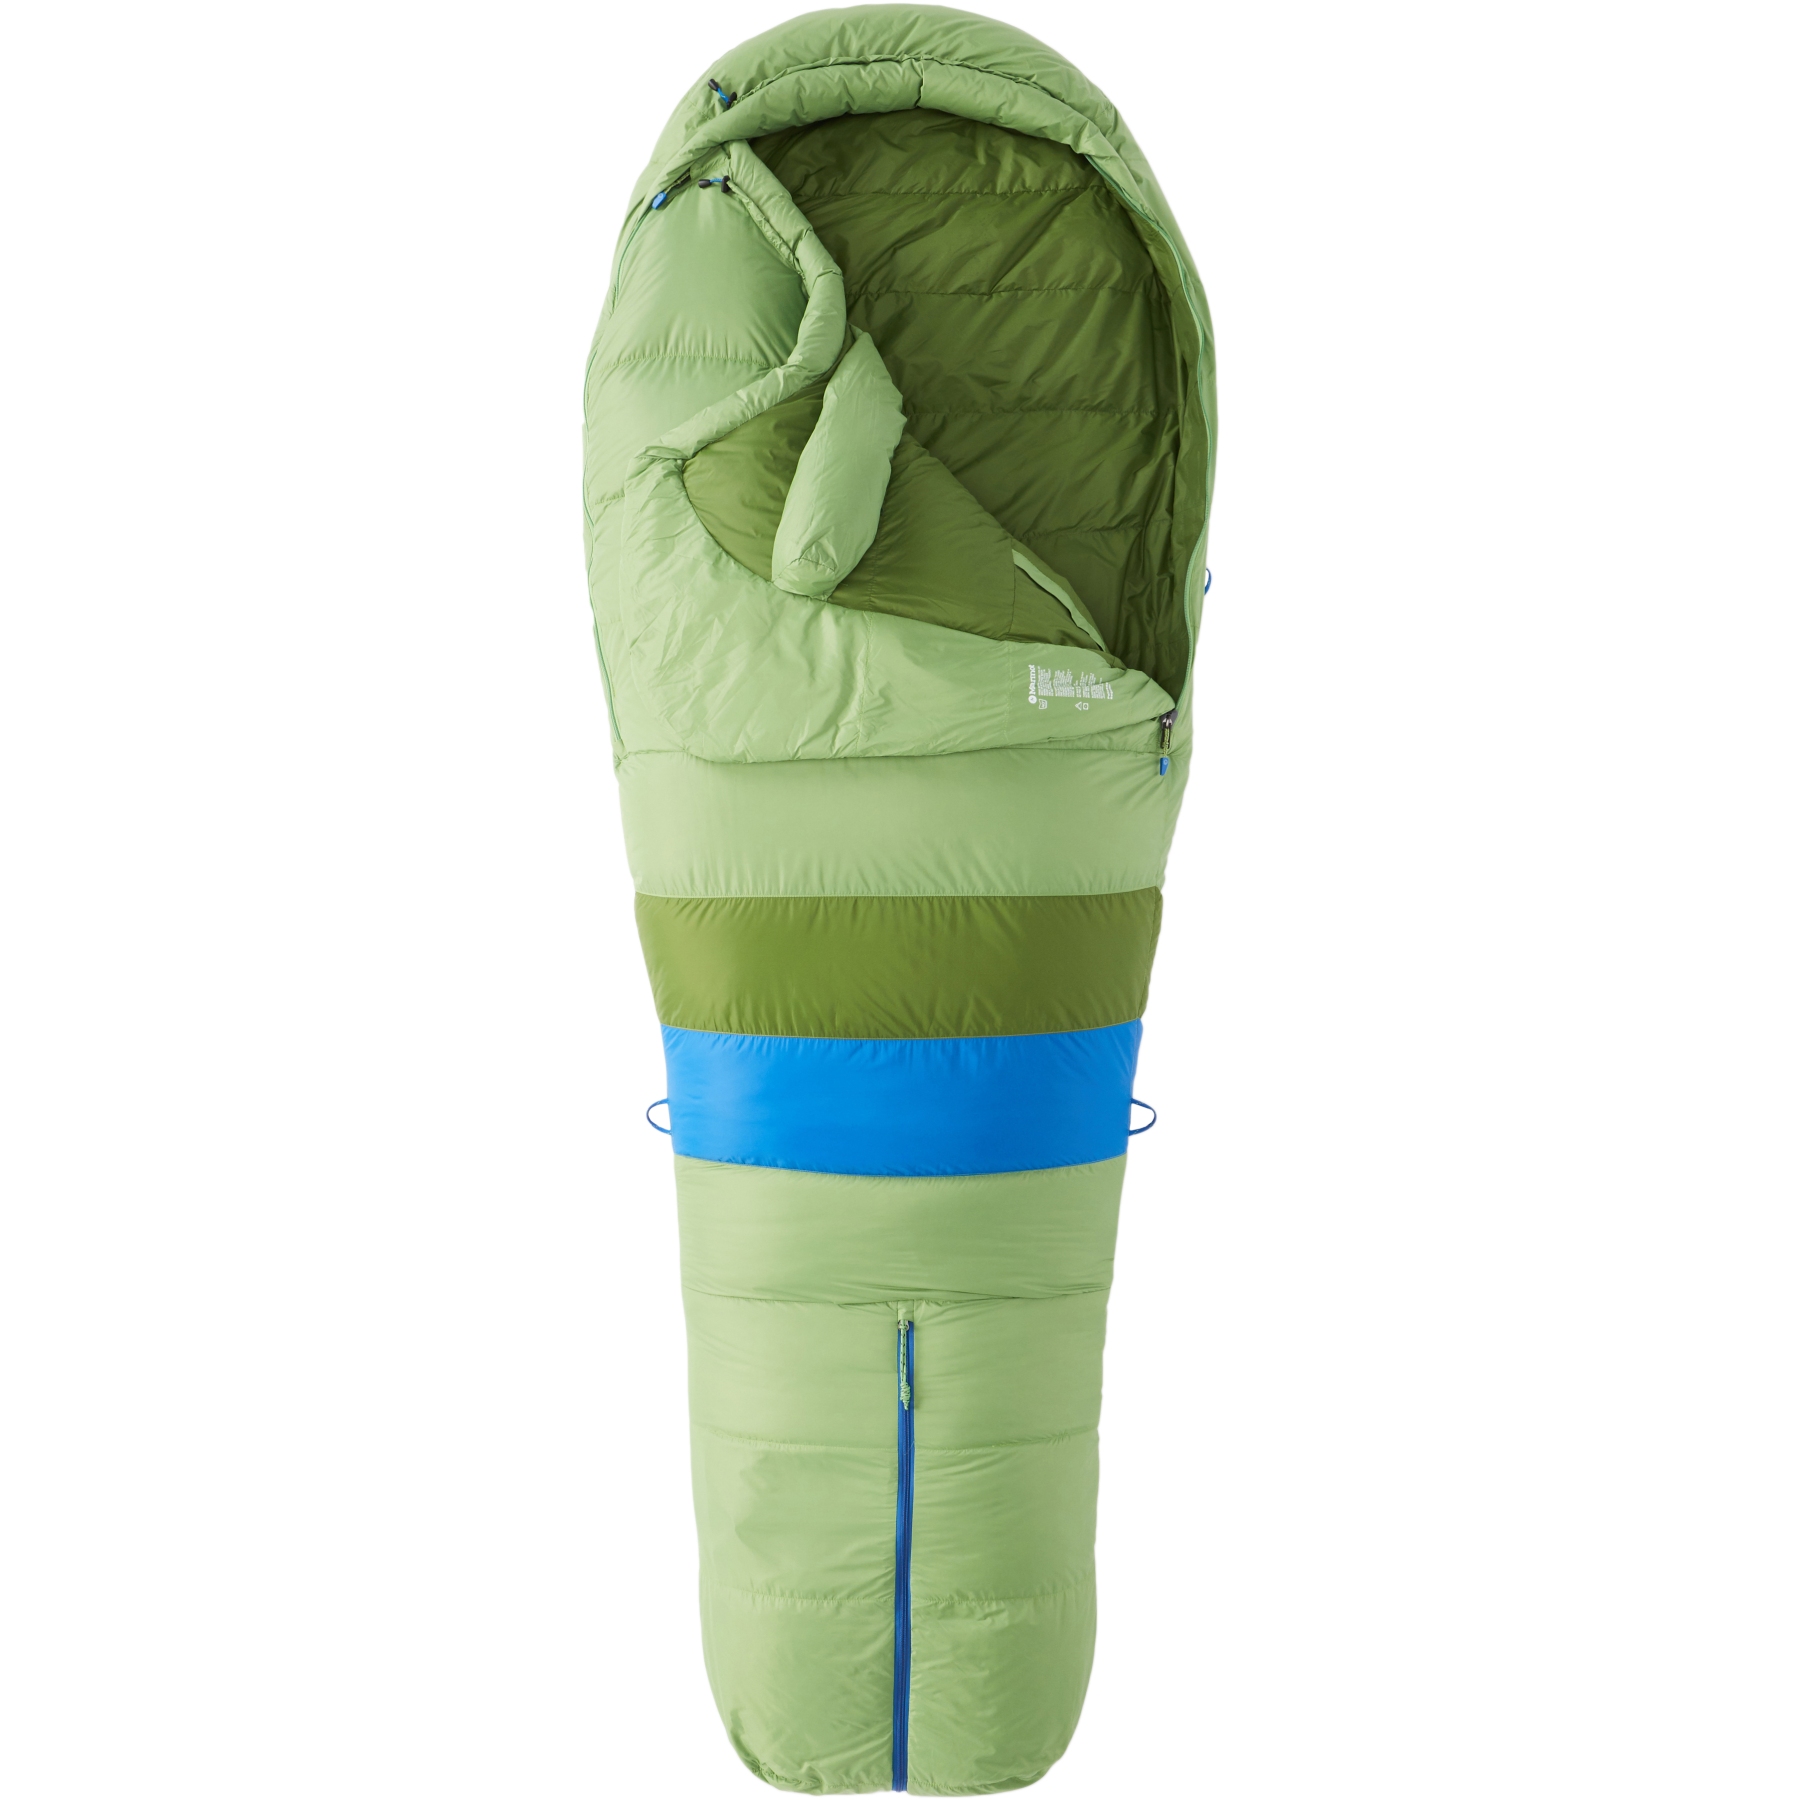 Picture of Marmot Palisade Regular Sleeping Bag - forest green/foliage